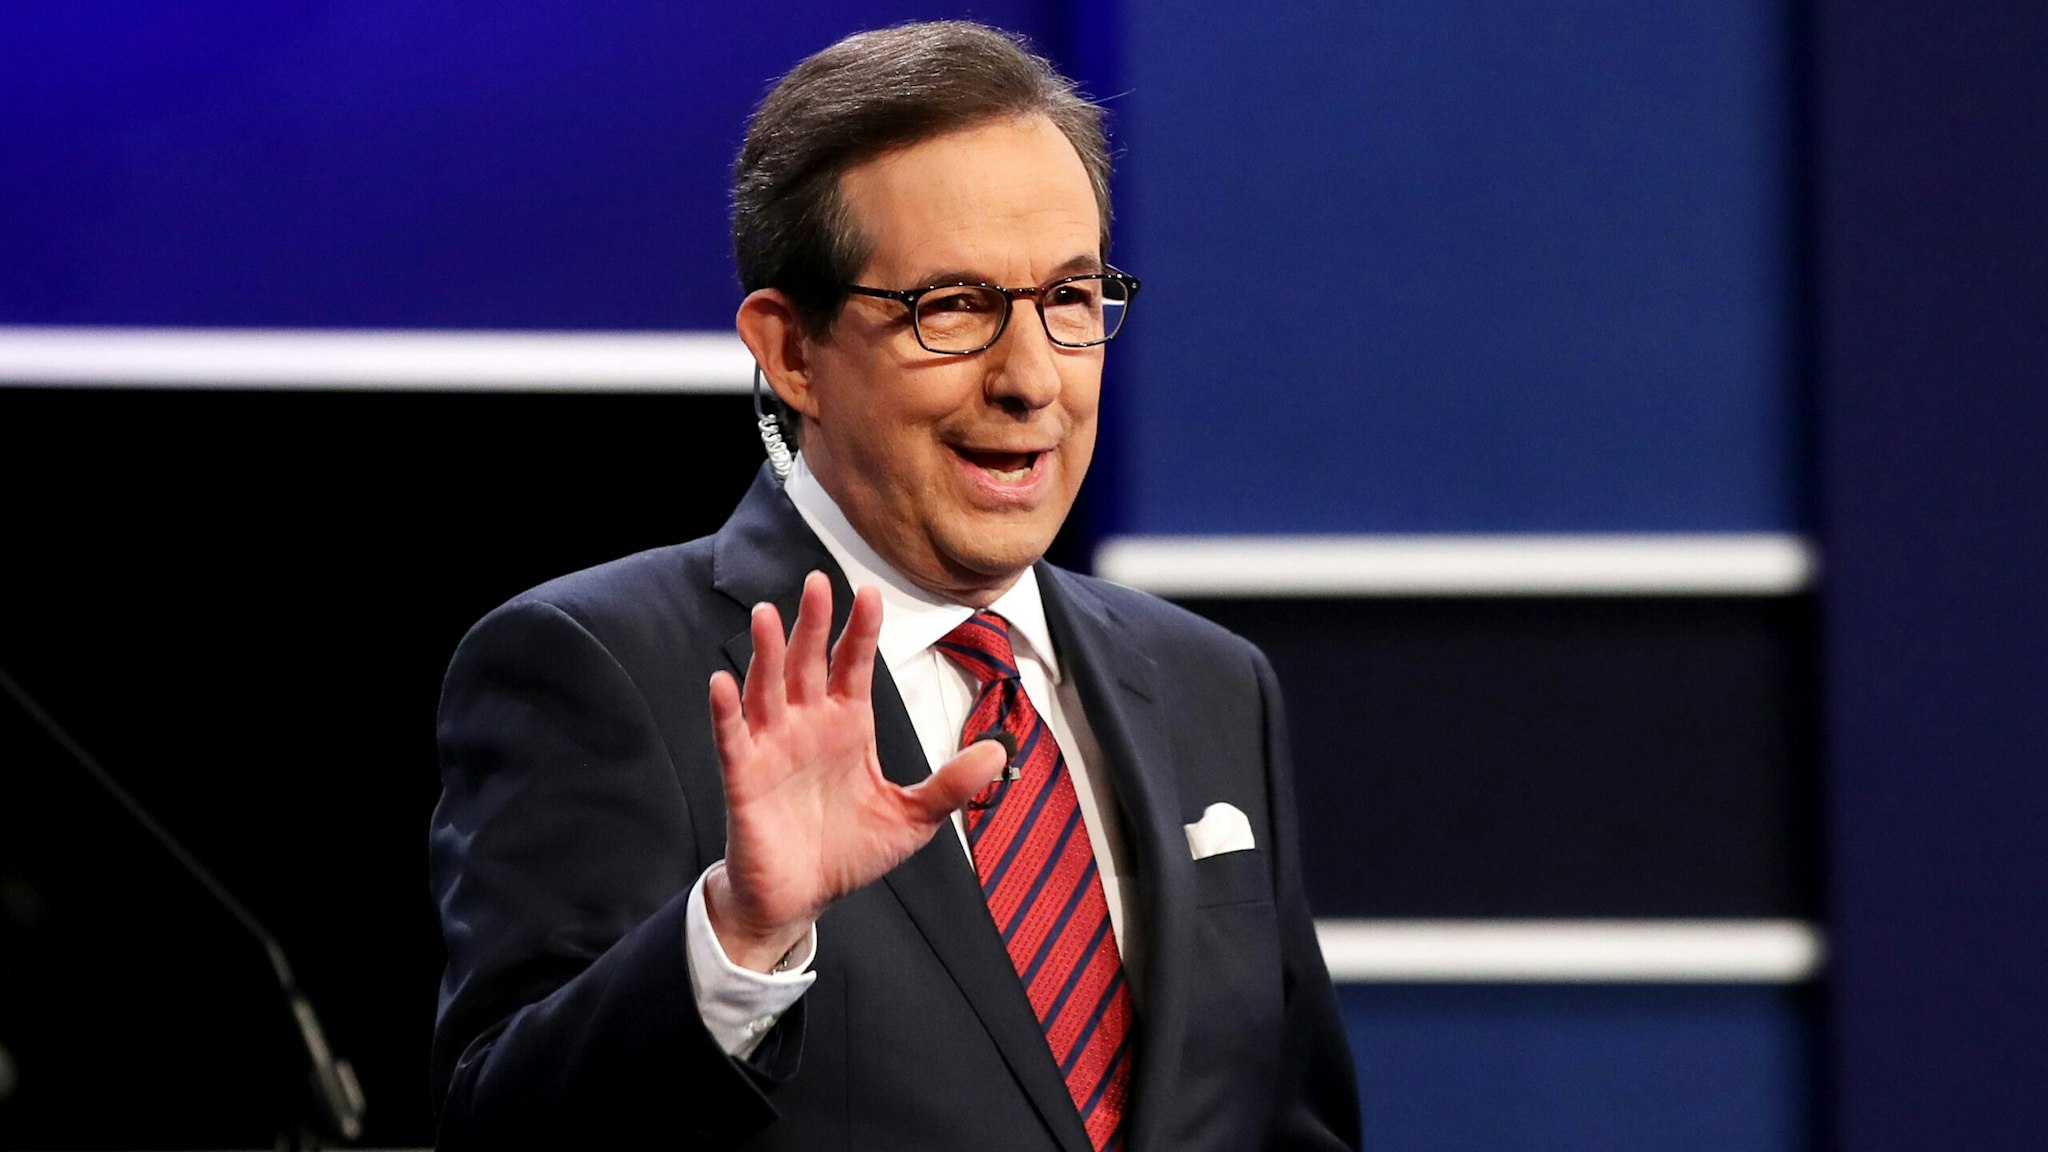 LAS VEGAS, NV - OCTOBER 19: Fox News anchor and moderator Chris Wallace speaks to the guests and attendees during the third U.S. presidential debate at the Thomas &amp; Mack Center on October 19, 2016 in Las Vegas, Nevada. Tonight is the final debate ahead of Election Day on November 8.